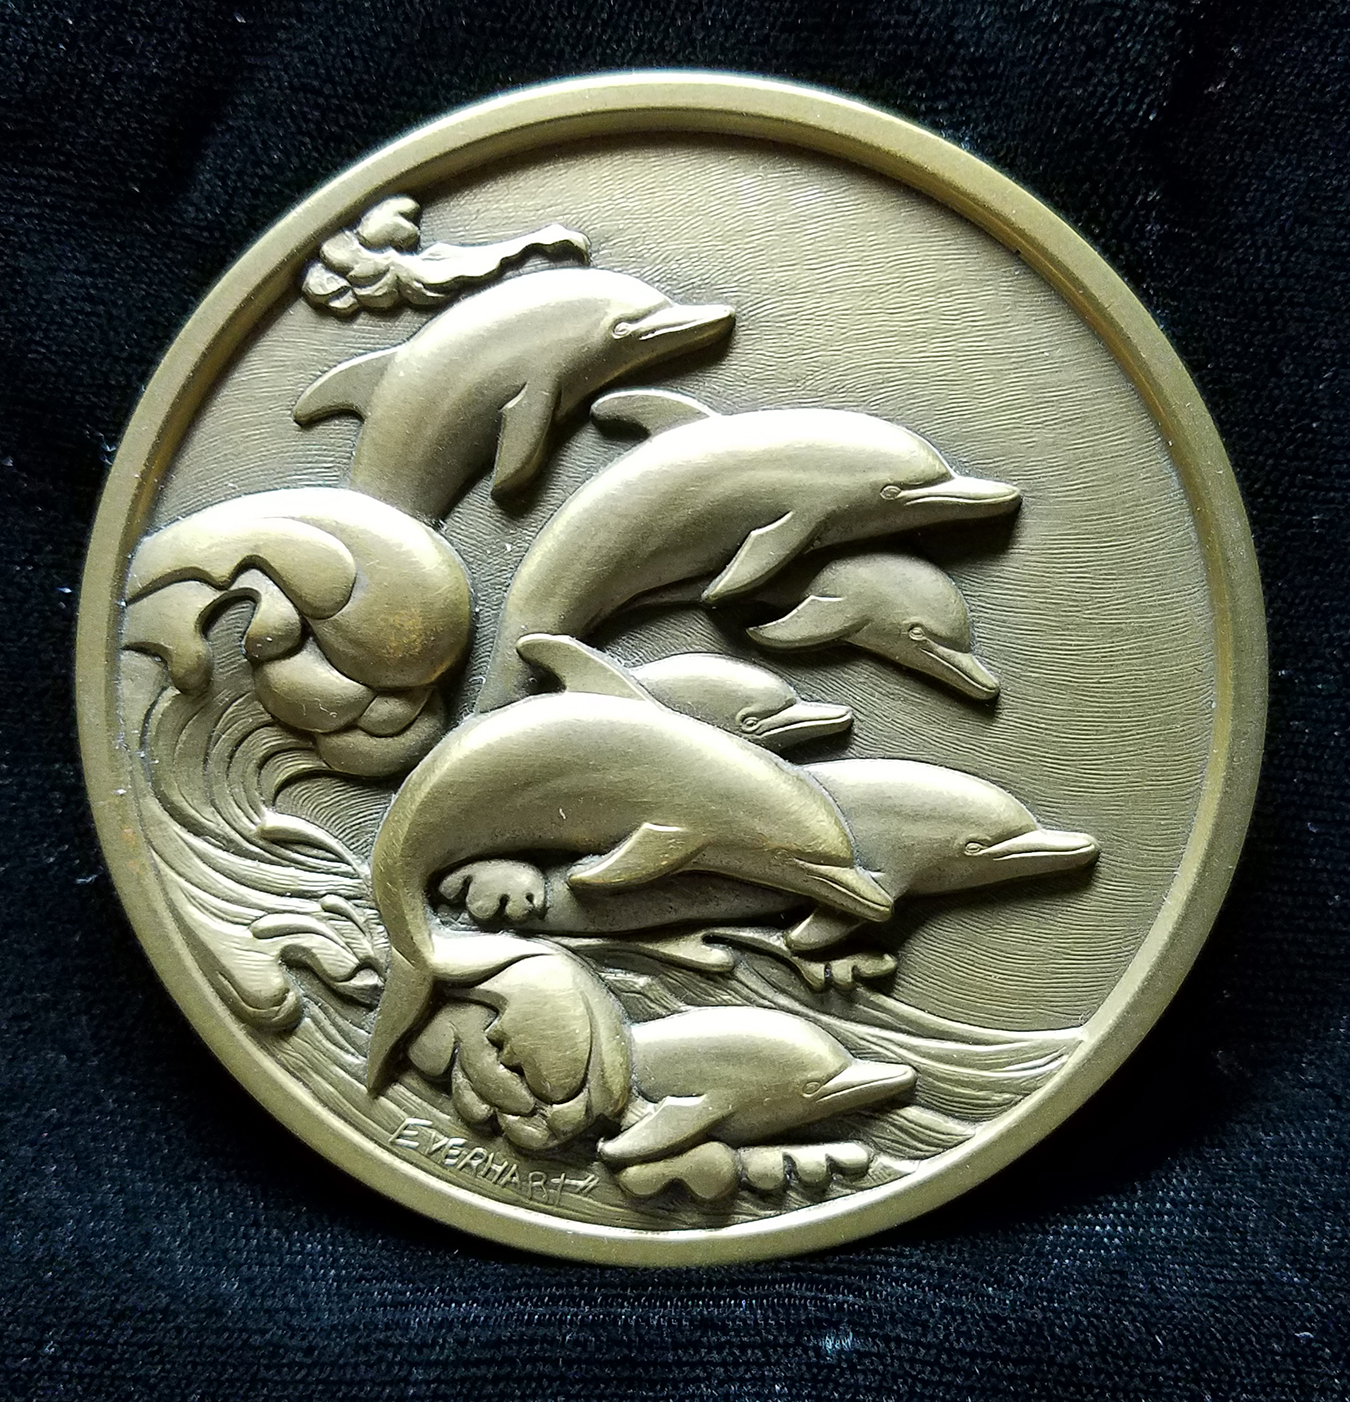 Dance of the Dolphins obverse